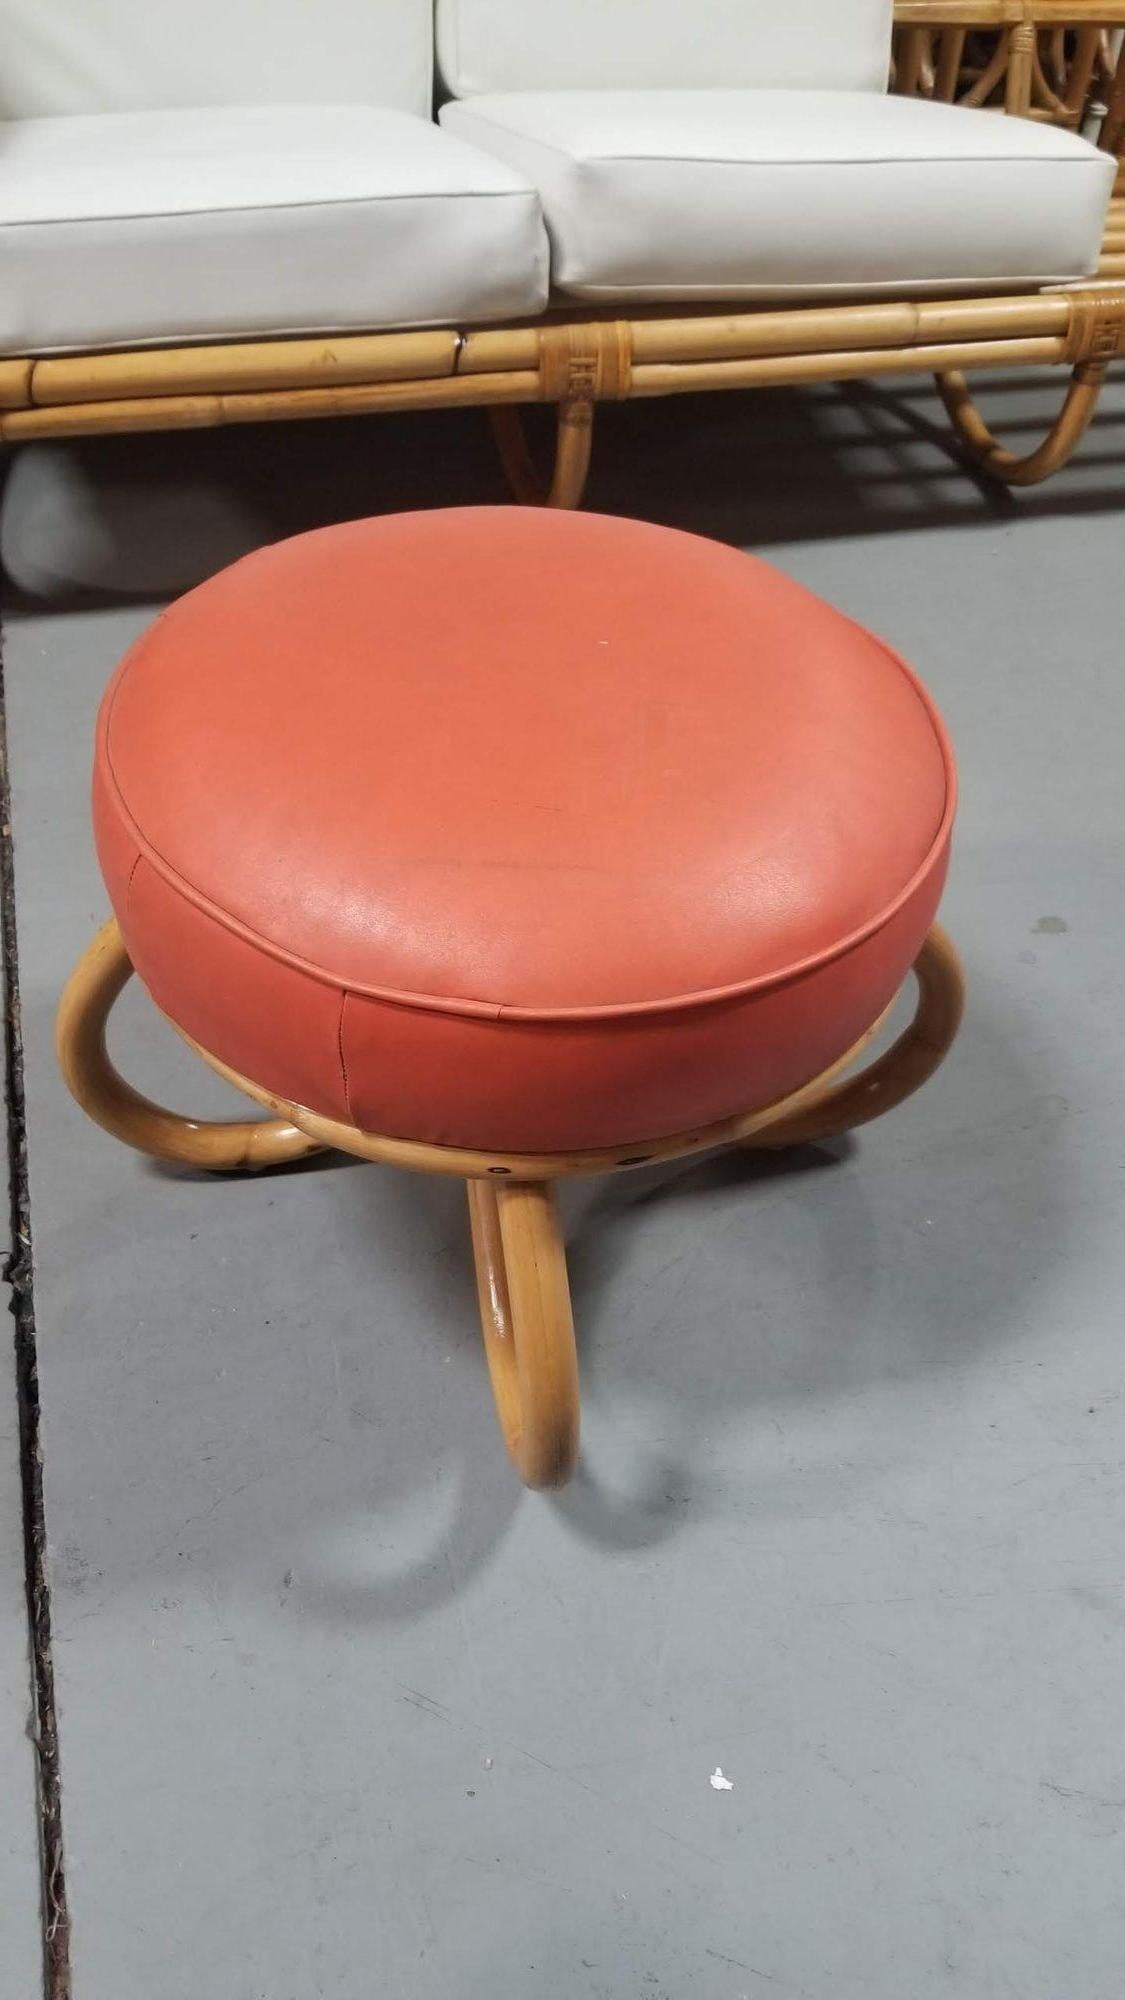 The Restored Coral Orange Naugahyde Footstool, adorned with vibrant Naugahyde upholstery and rattan loop legs, harmonizes vintage allure and modern sophistication. Its retro charm is revitalized through the bold coral orange hue, while the intricate